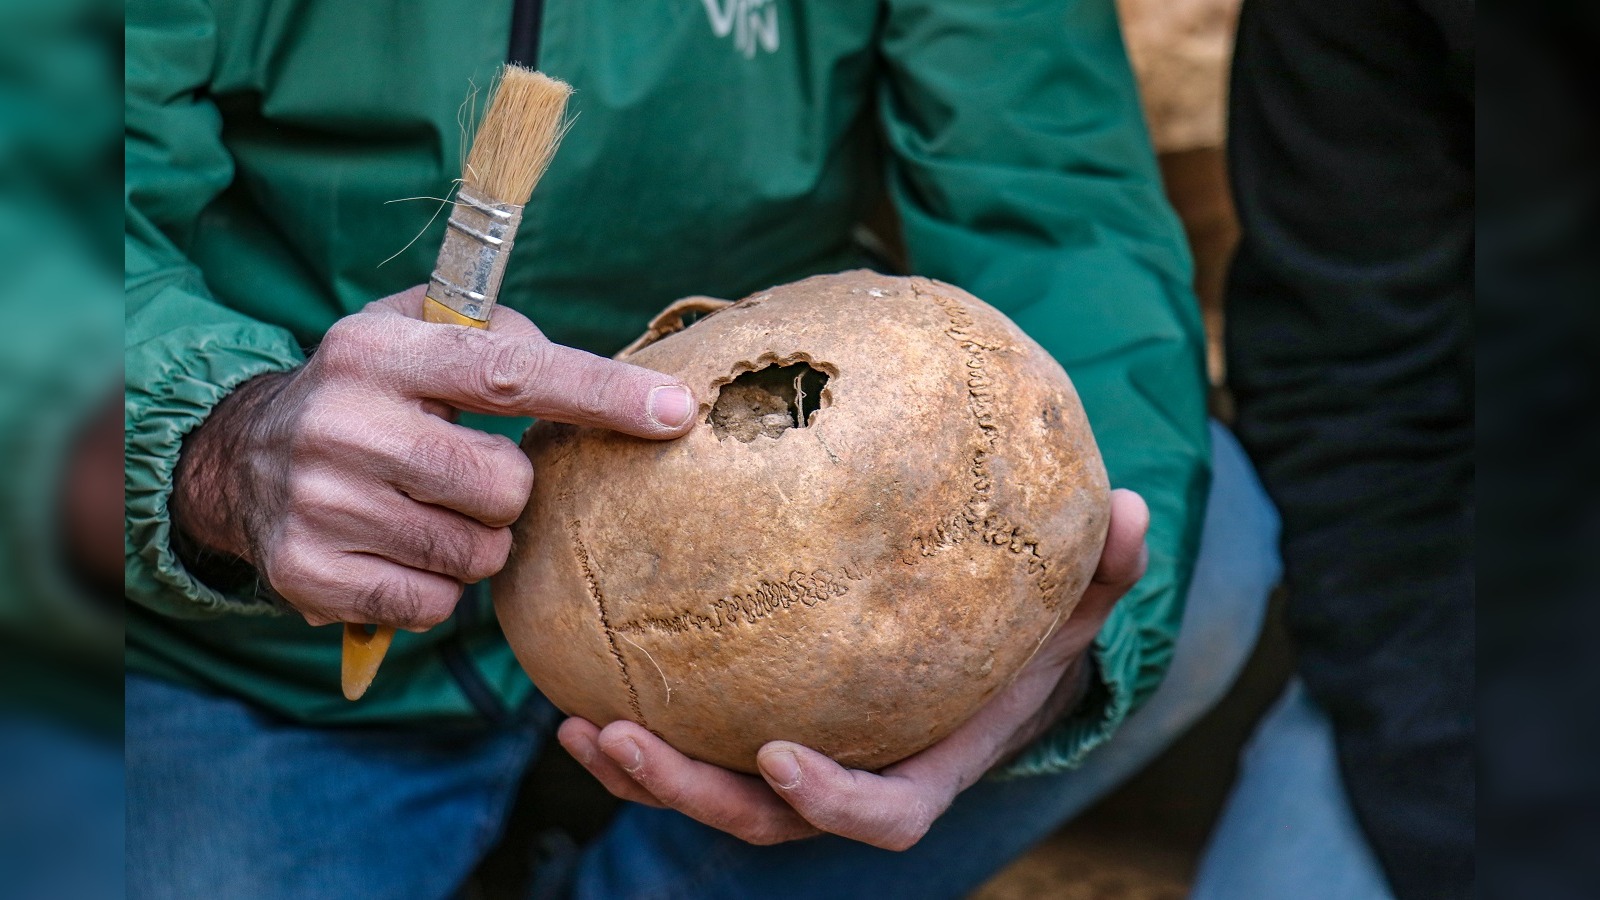 3,200-Year-Old Skulls With Surgical Evidence Found in Eastern Turkey